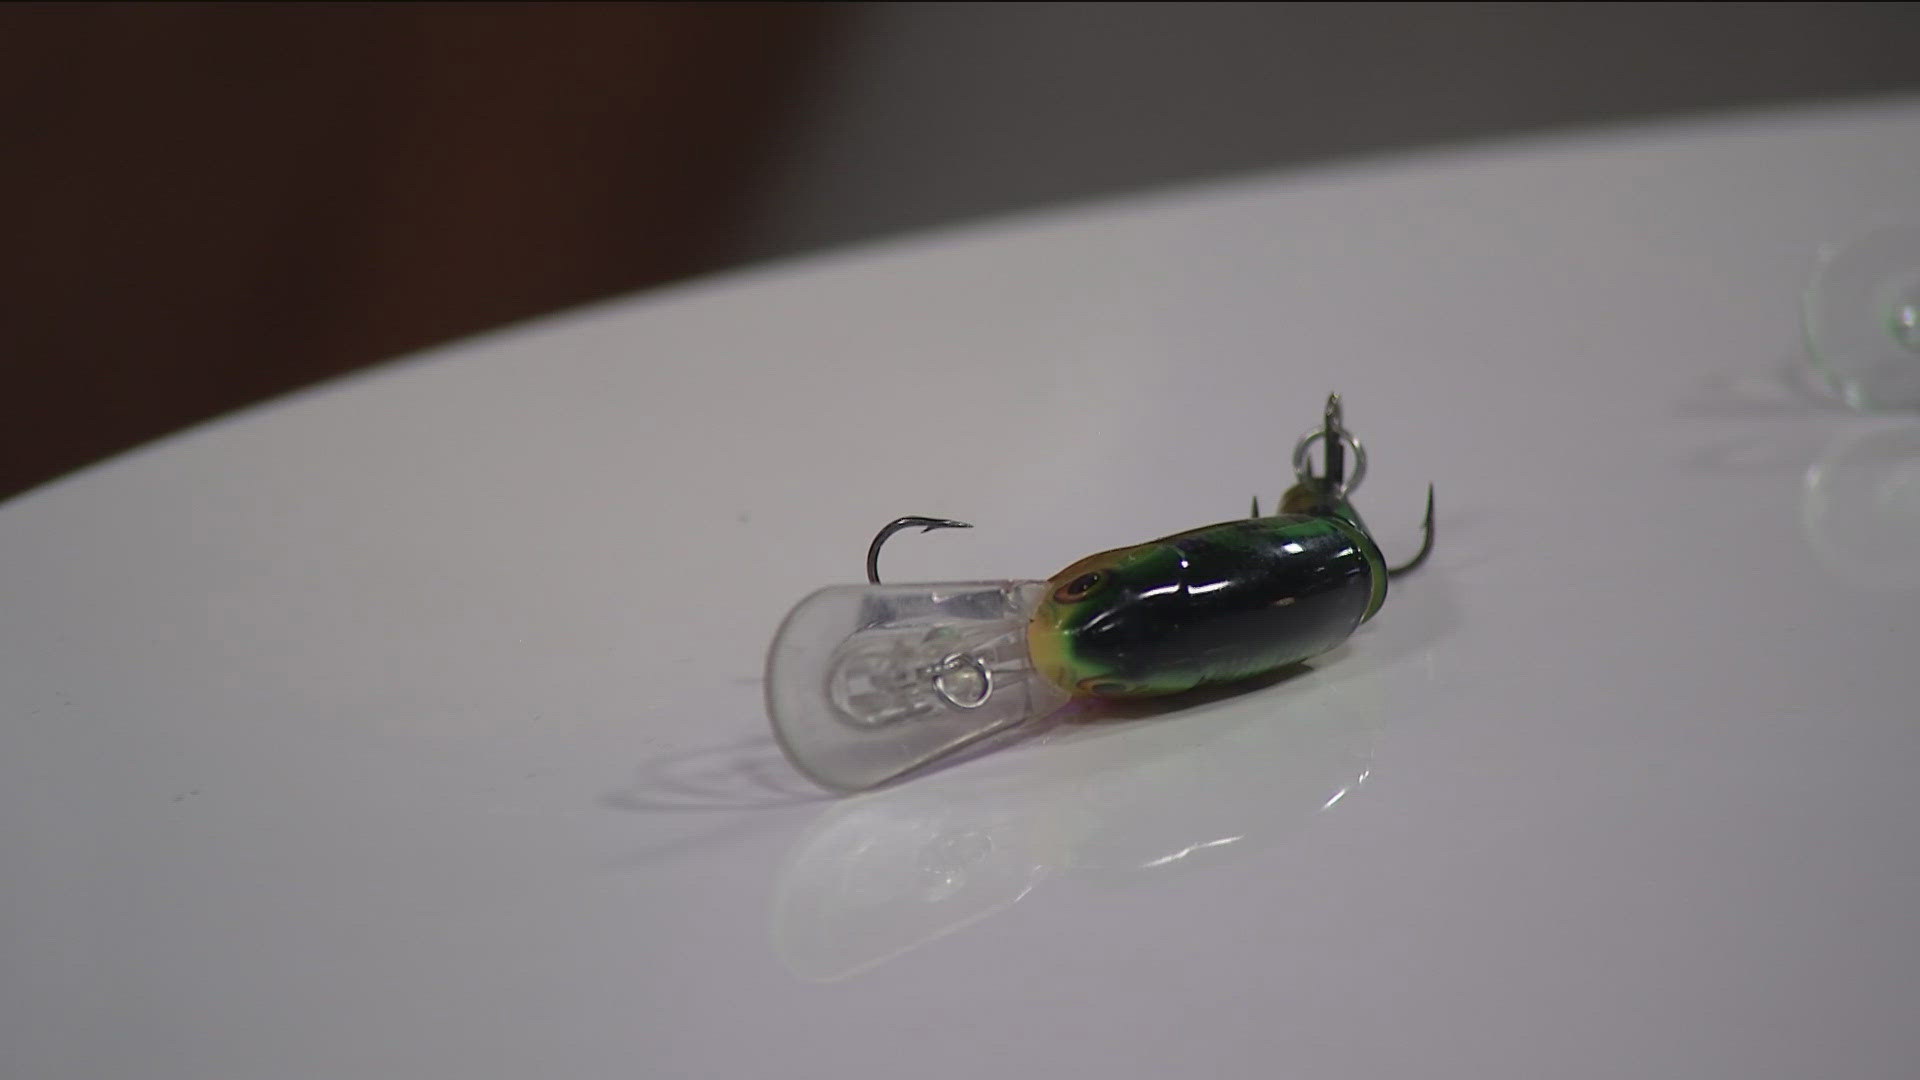 Jordan Rodriguez explains why the Rapala Shad Rap crankbait is one of the most effective and versatile lures for catching bass, trout, panfish and more in Idaho.